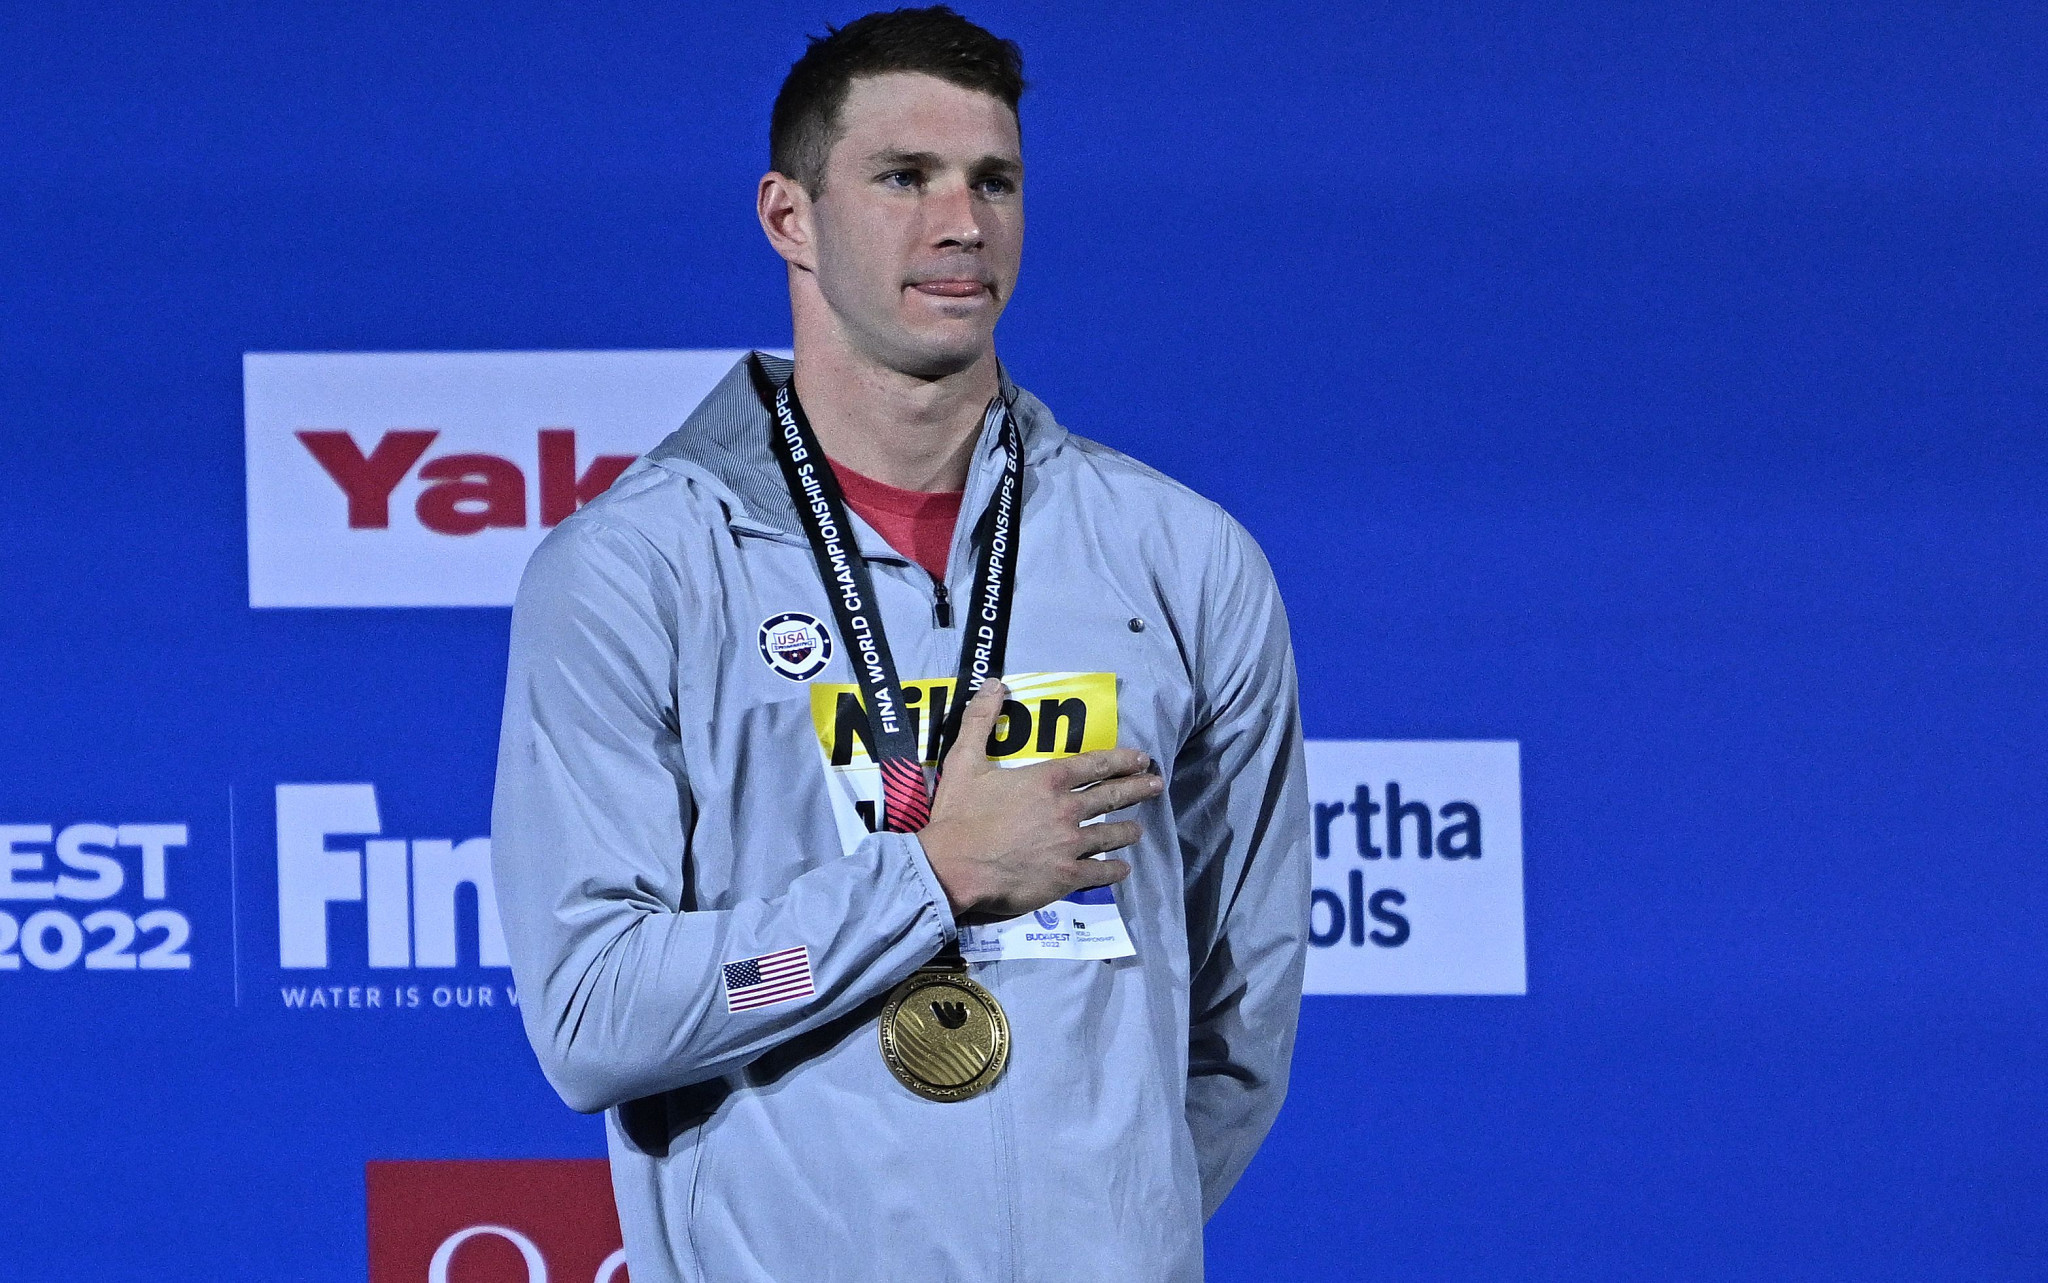 After two World Championships silver medals in the men's 200m backstroke, Ryan Murphy of the US clinched gold in Budapest ©Getty Images